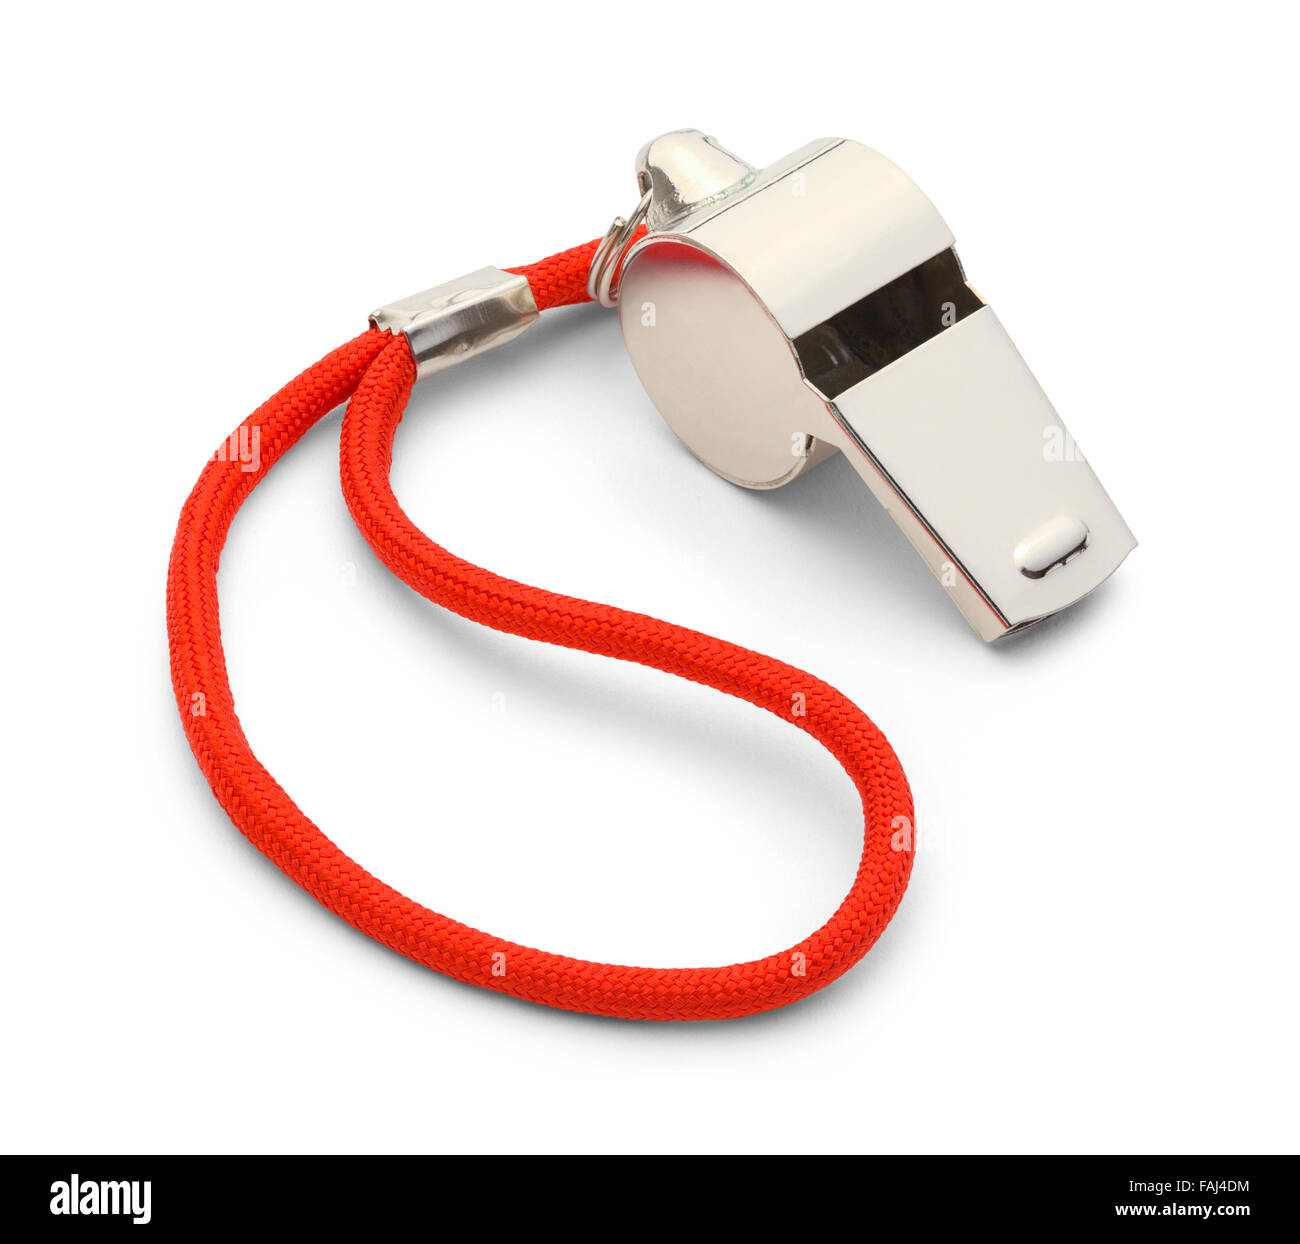 Coach Gym Whistle with Red Cord Isolated on White Background. Stock Photo